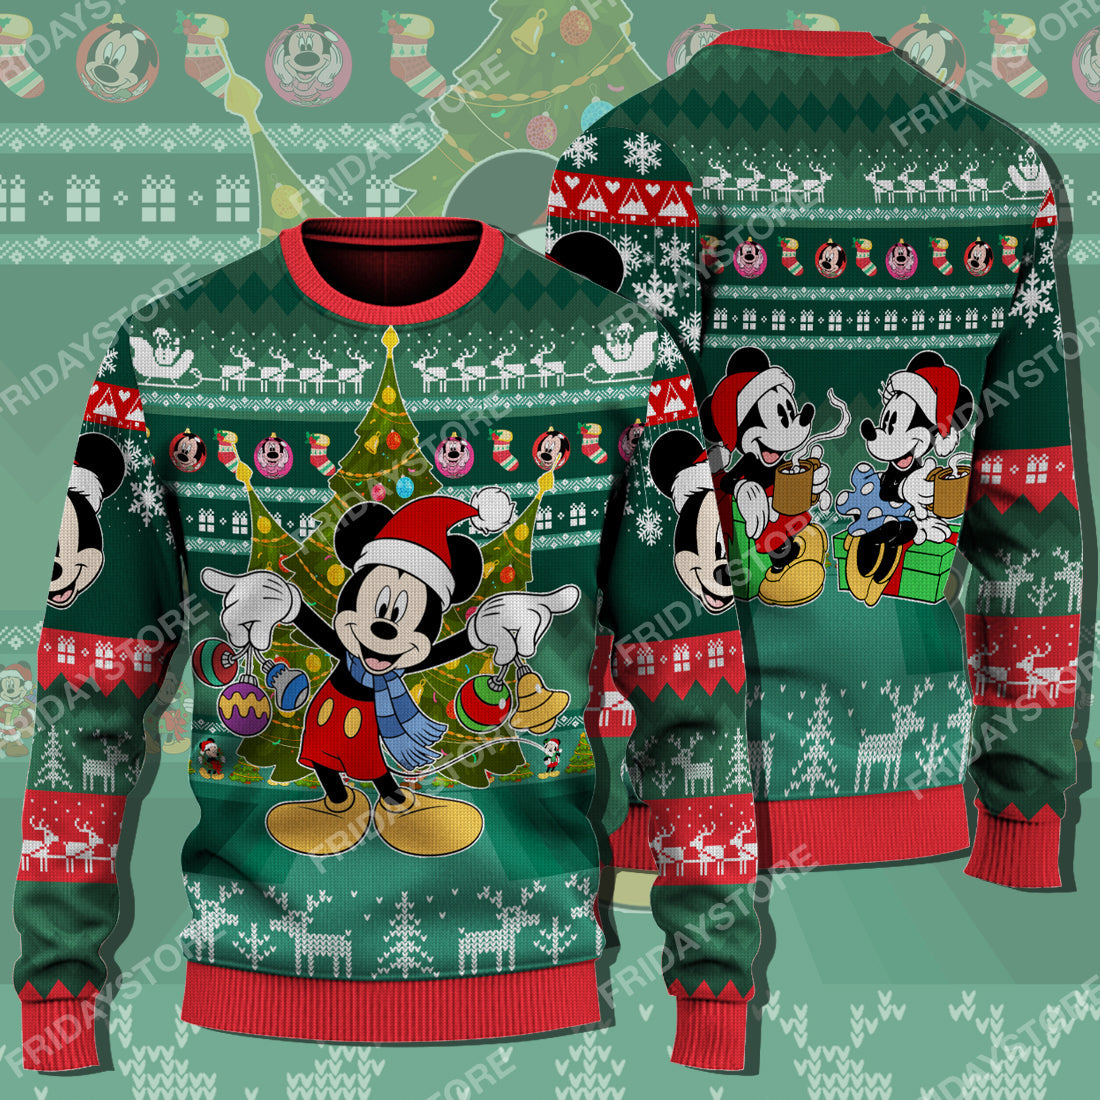 Disney Sweater Happy Mouse With Christmas Tree Christmas Ugly Sweater Awesome High Quality Disney MK Mouse Ugly Sweater 1744